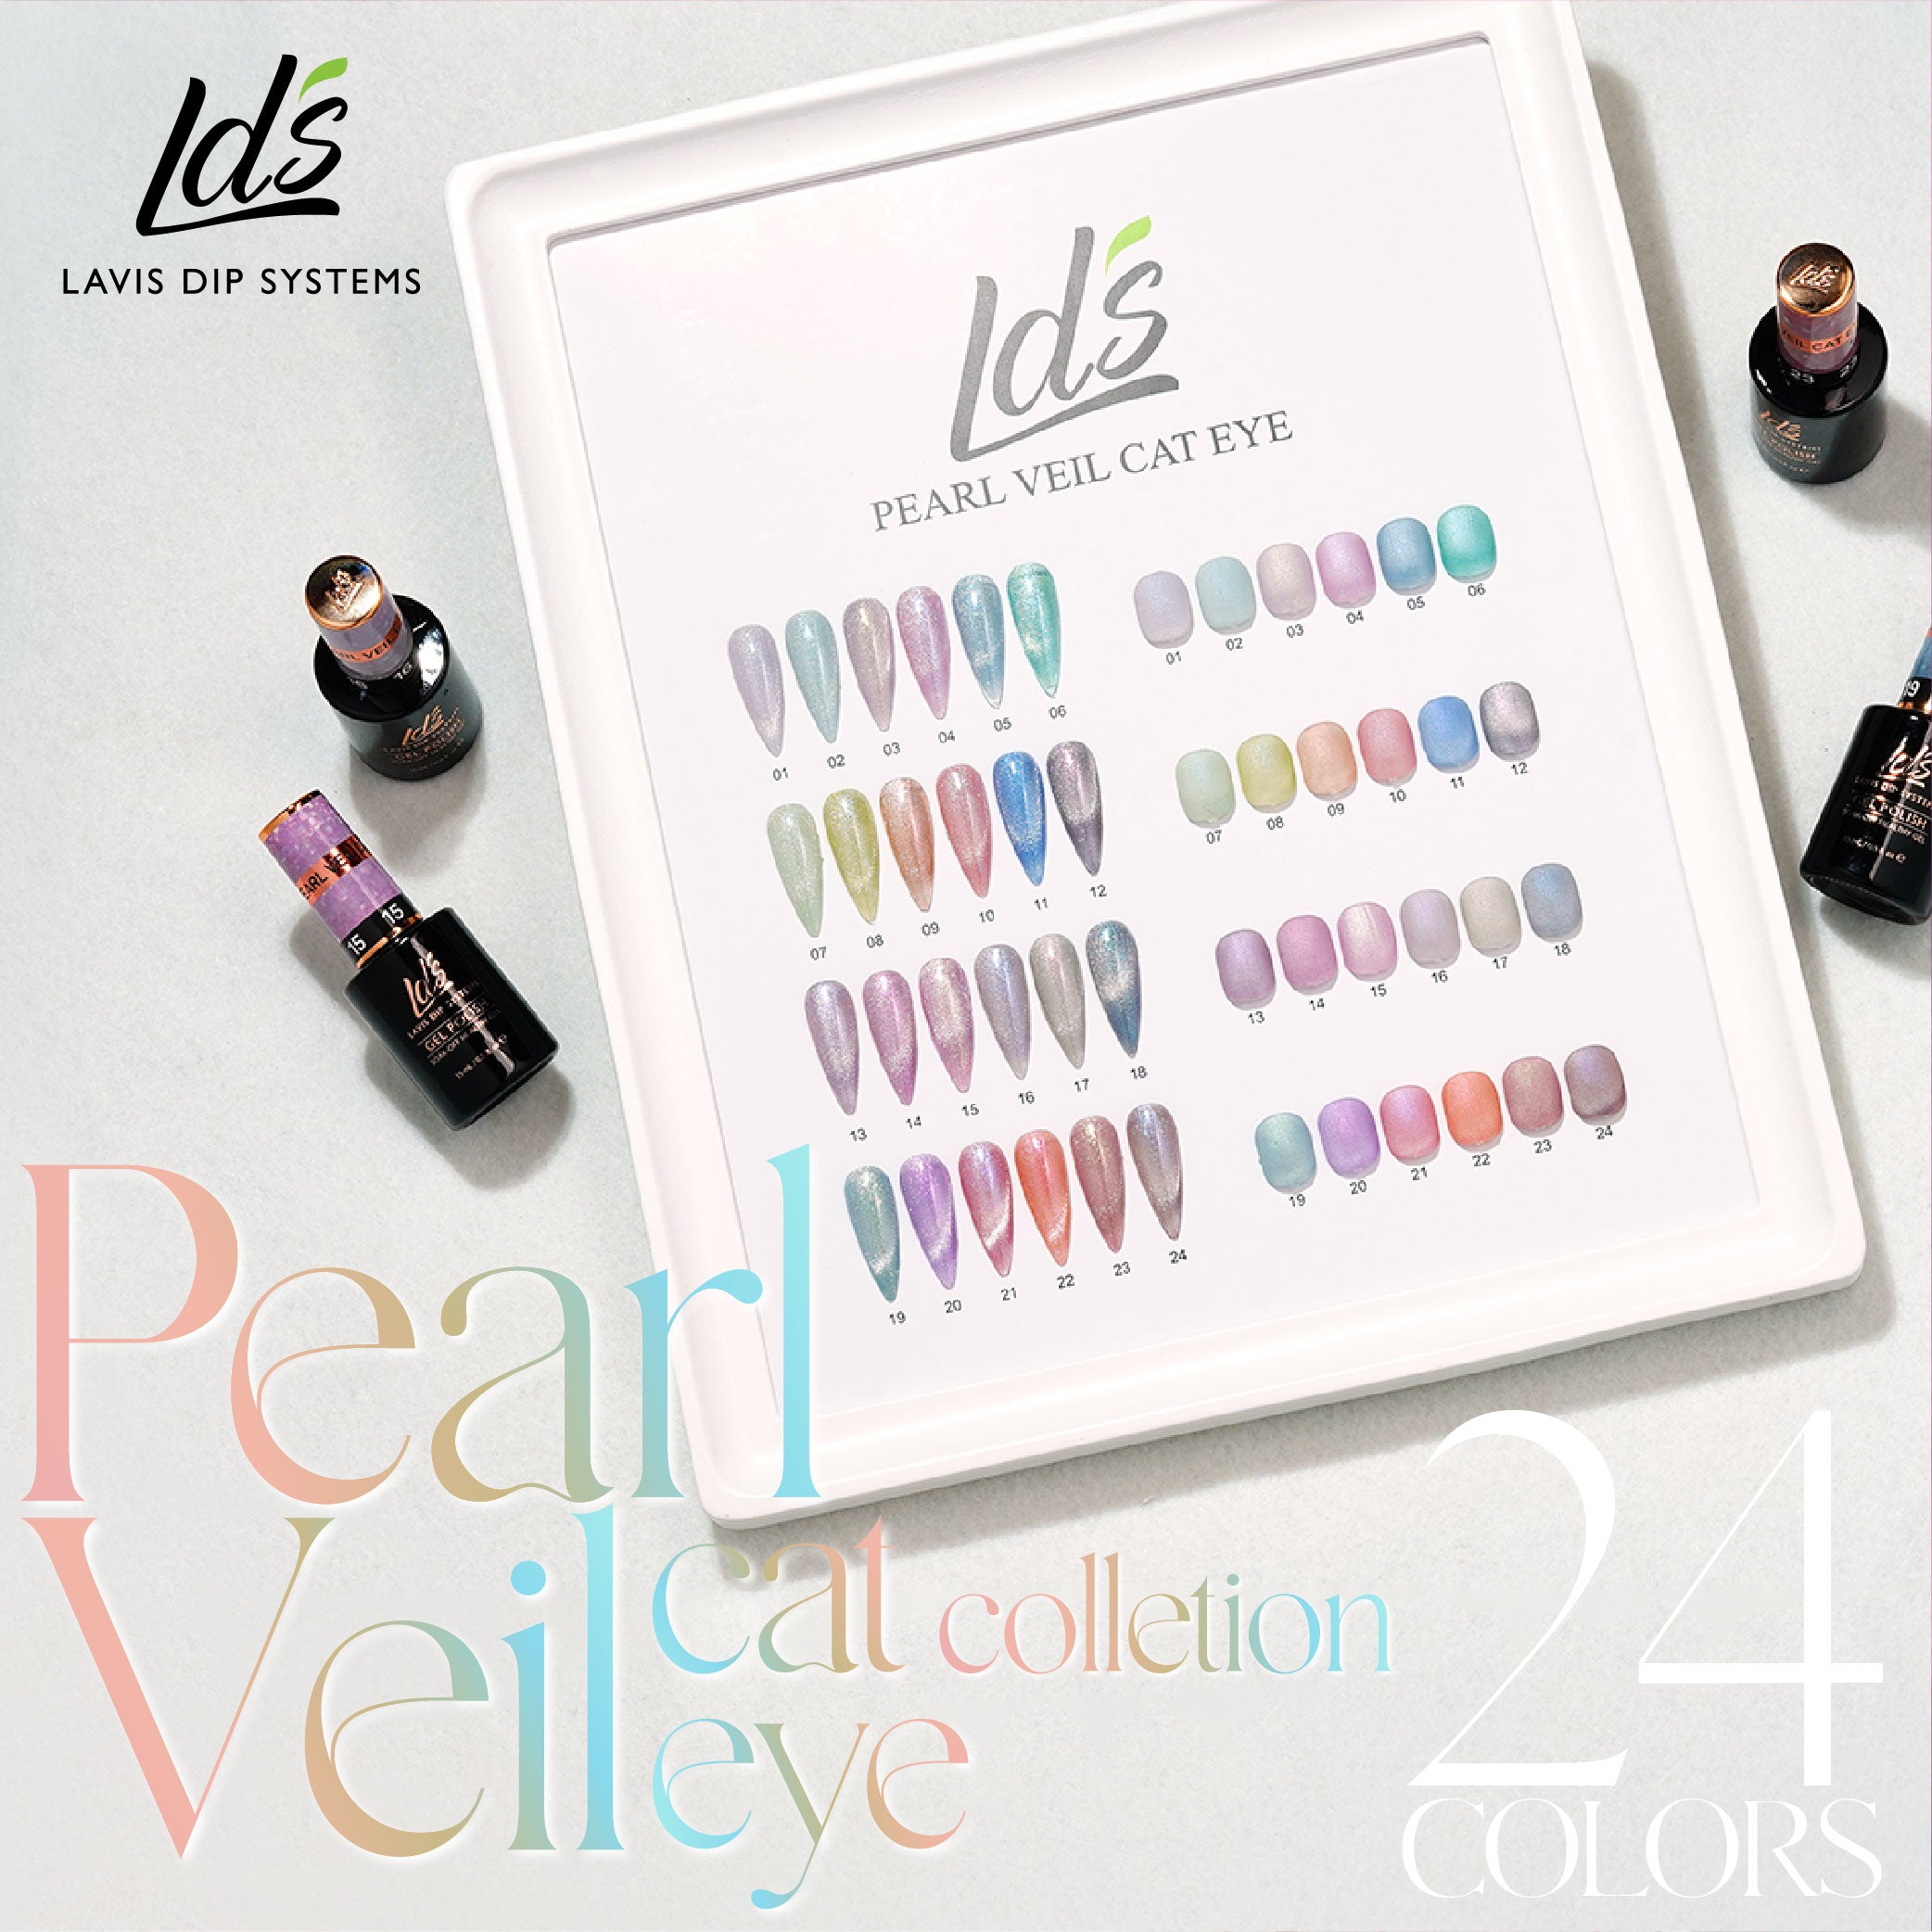 LDS Pearl CE - 12 - Pearl Veil Cat Eye Collection